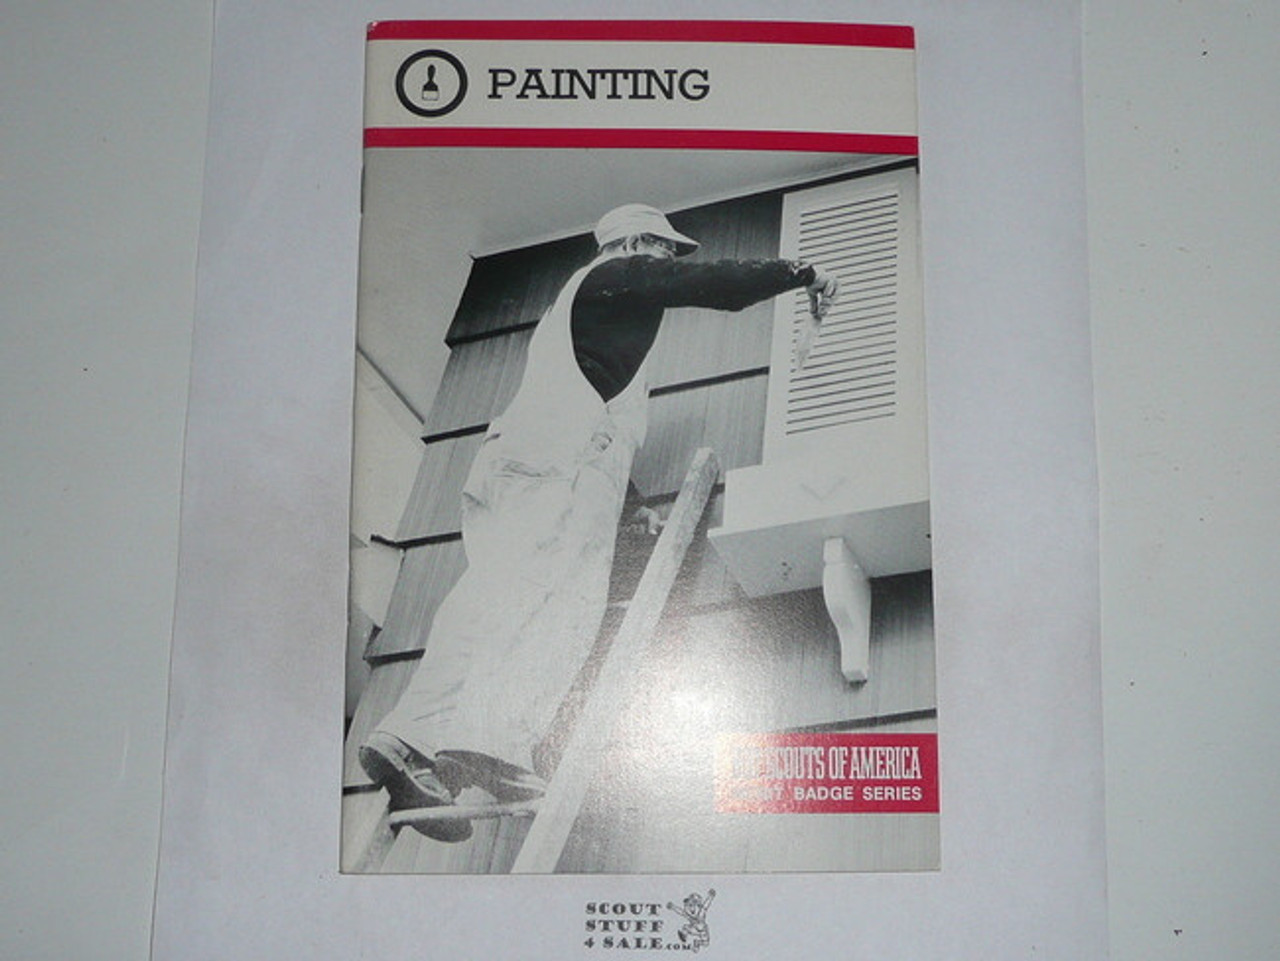 Painting Merit Badge Pamphlet, Type 9, Red Band Cover, 3-86 Printing